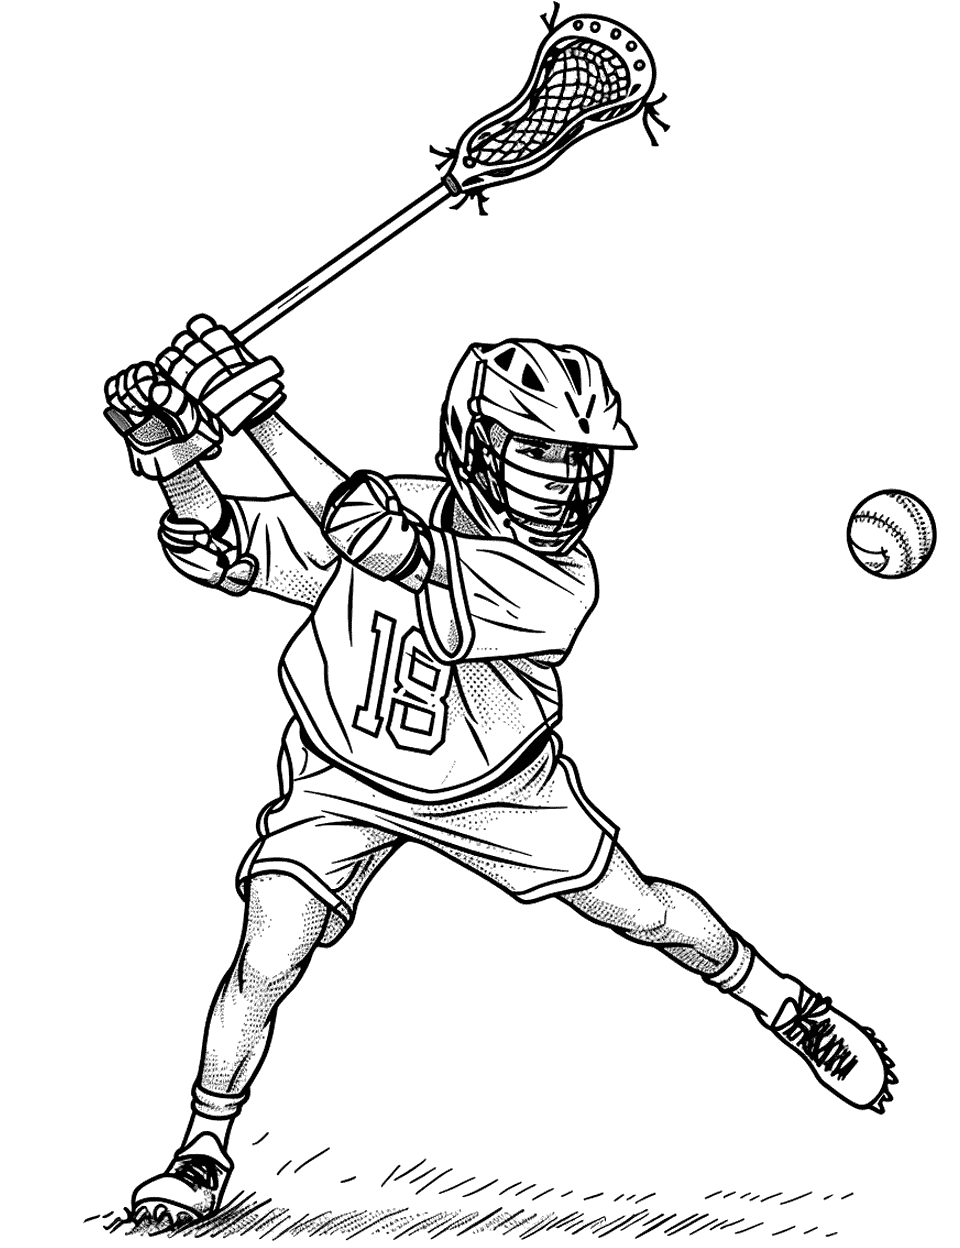 Lacrosse Goal Shot Sports Coloring Page - A lacrosse player shooting toward the goal.